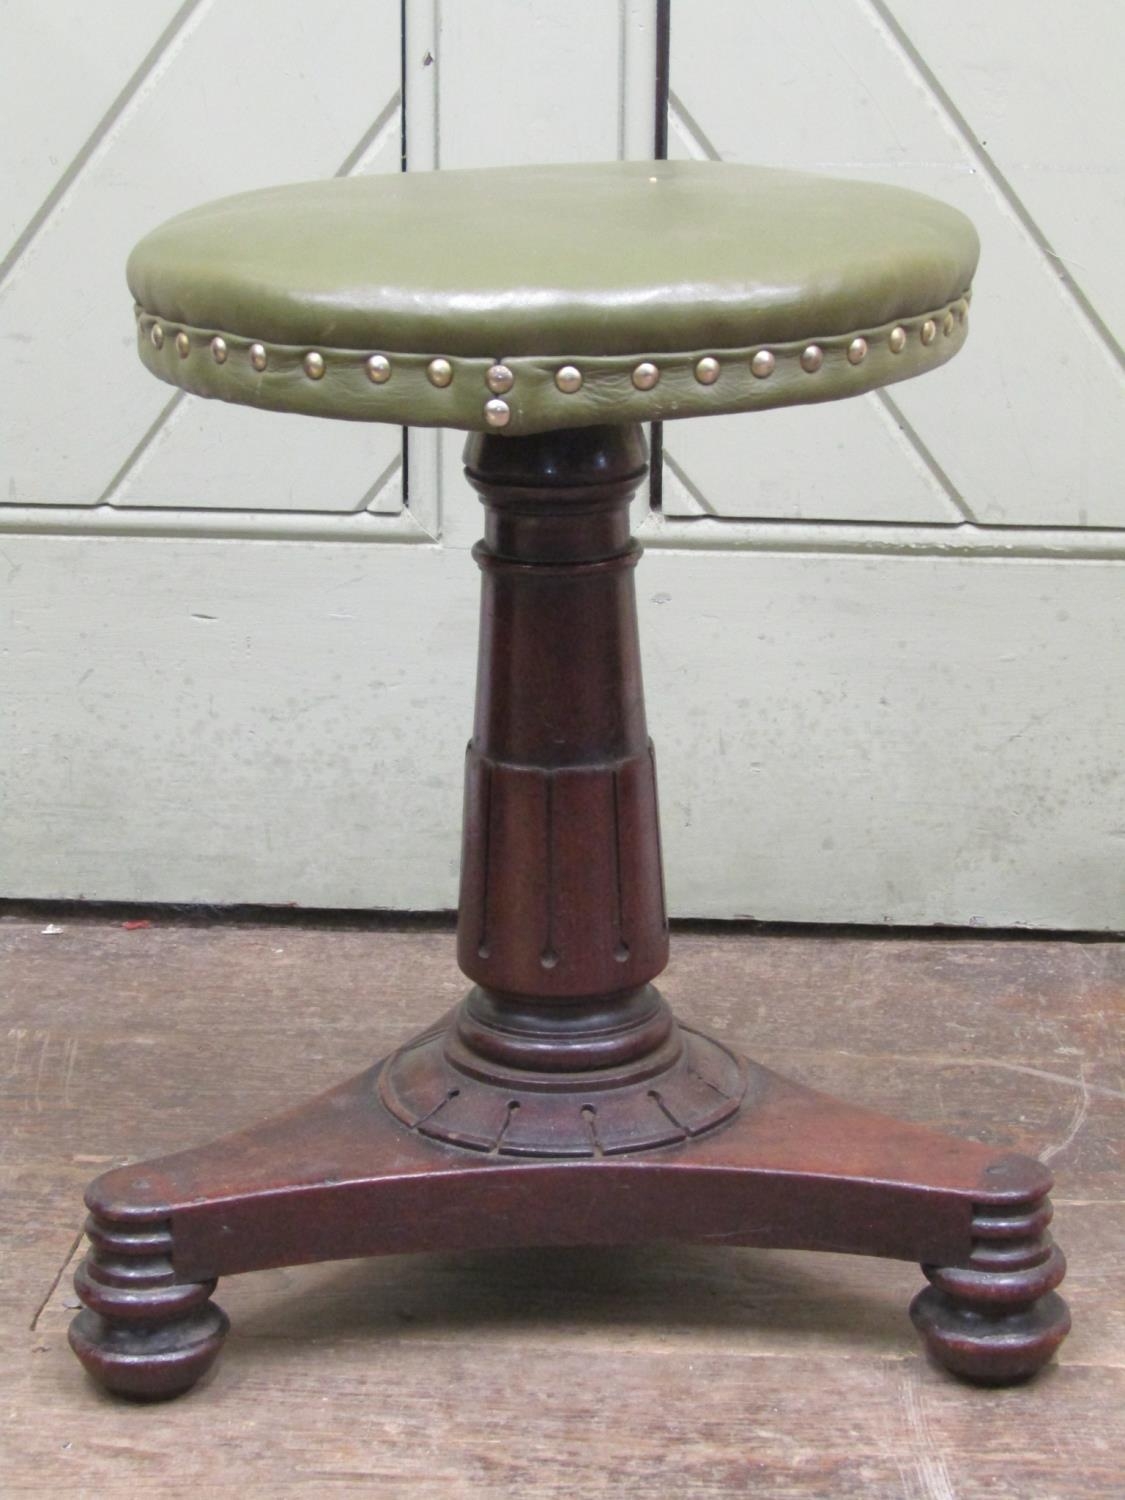 A William IV mahogany piano stool upholstered in green leather, raised on an adjustable column and